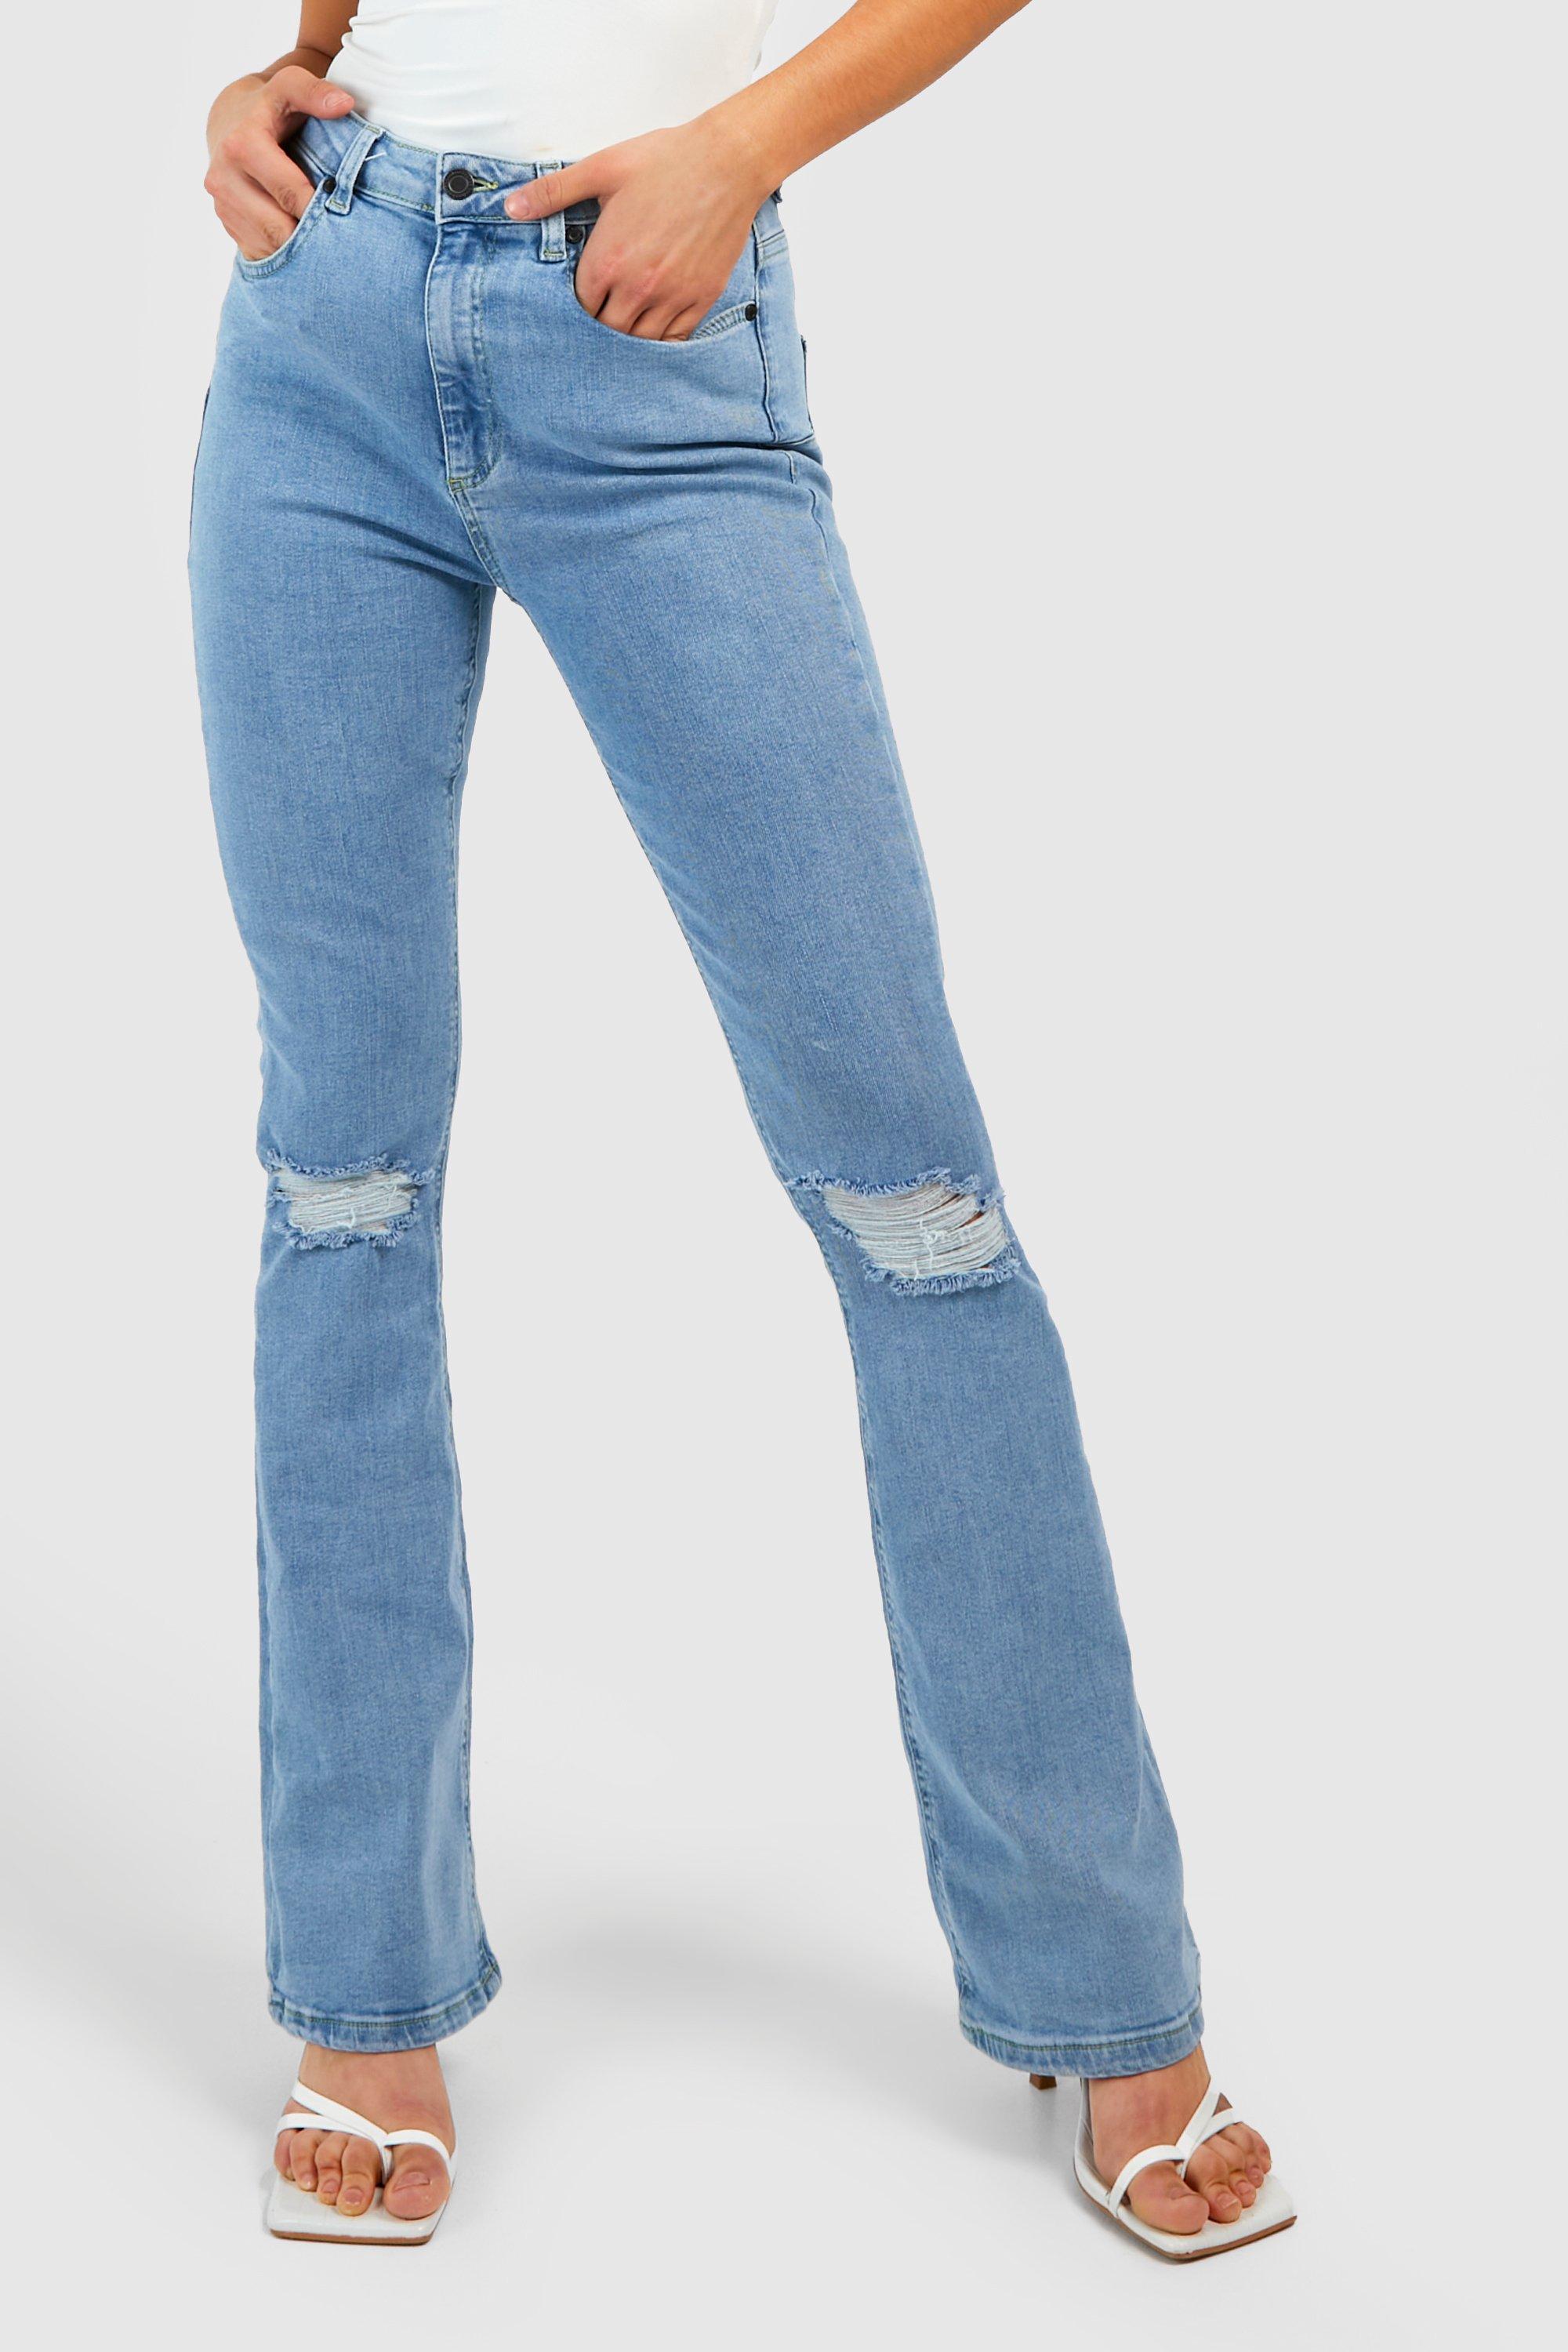 https://media.boohoo.com/i/boohoo/gzz16926_washed%20blue_xl_3/female-washed%20blue-mid-rise-butt-shaper-ripped-flared-jeans